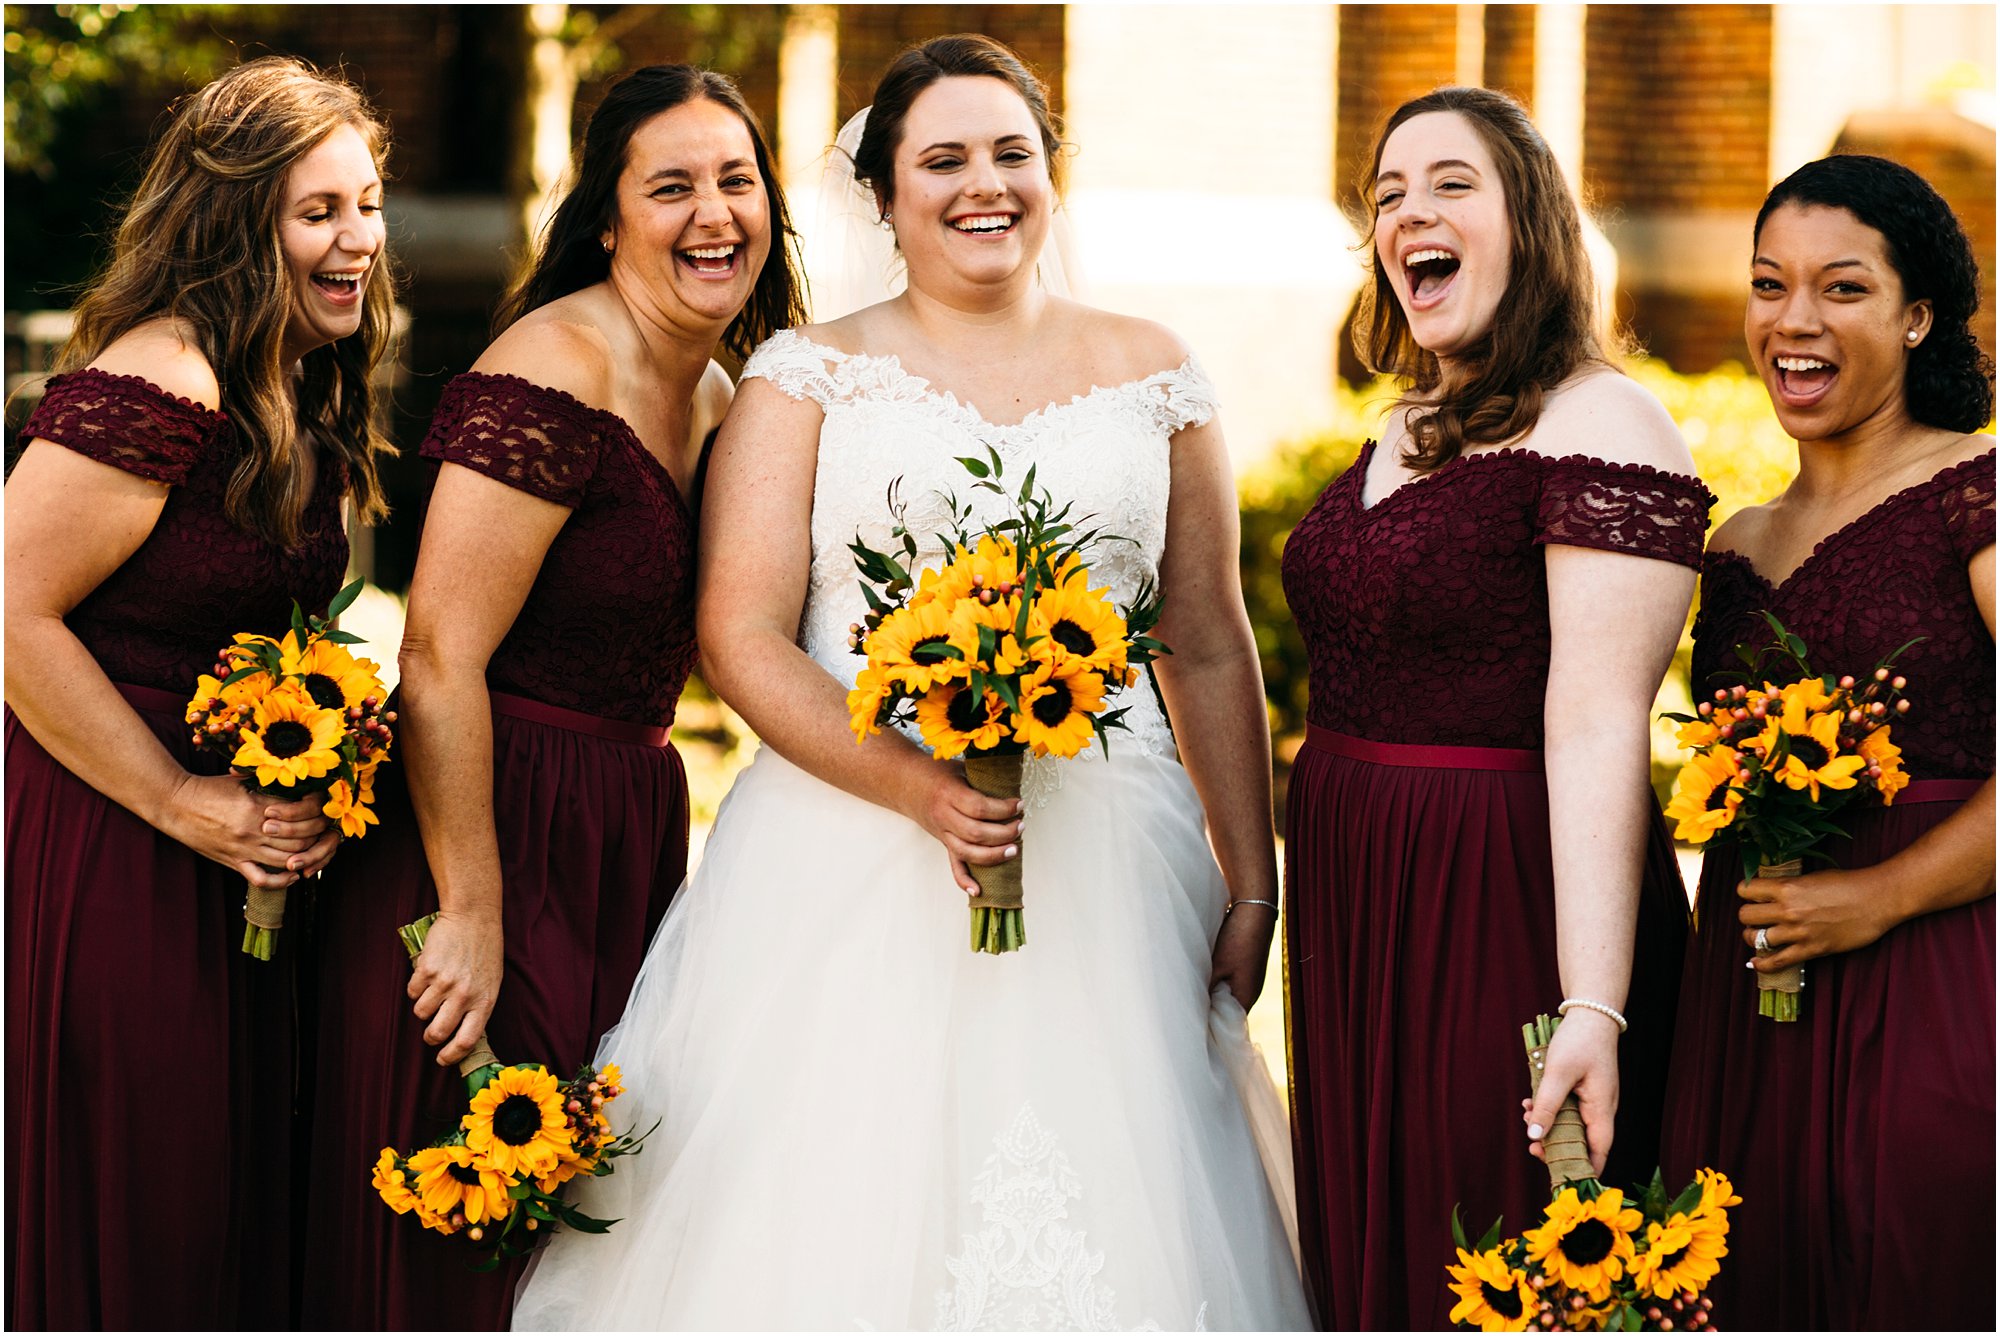 Bridesmaids all laughing together as bride smiles at camera